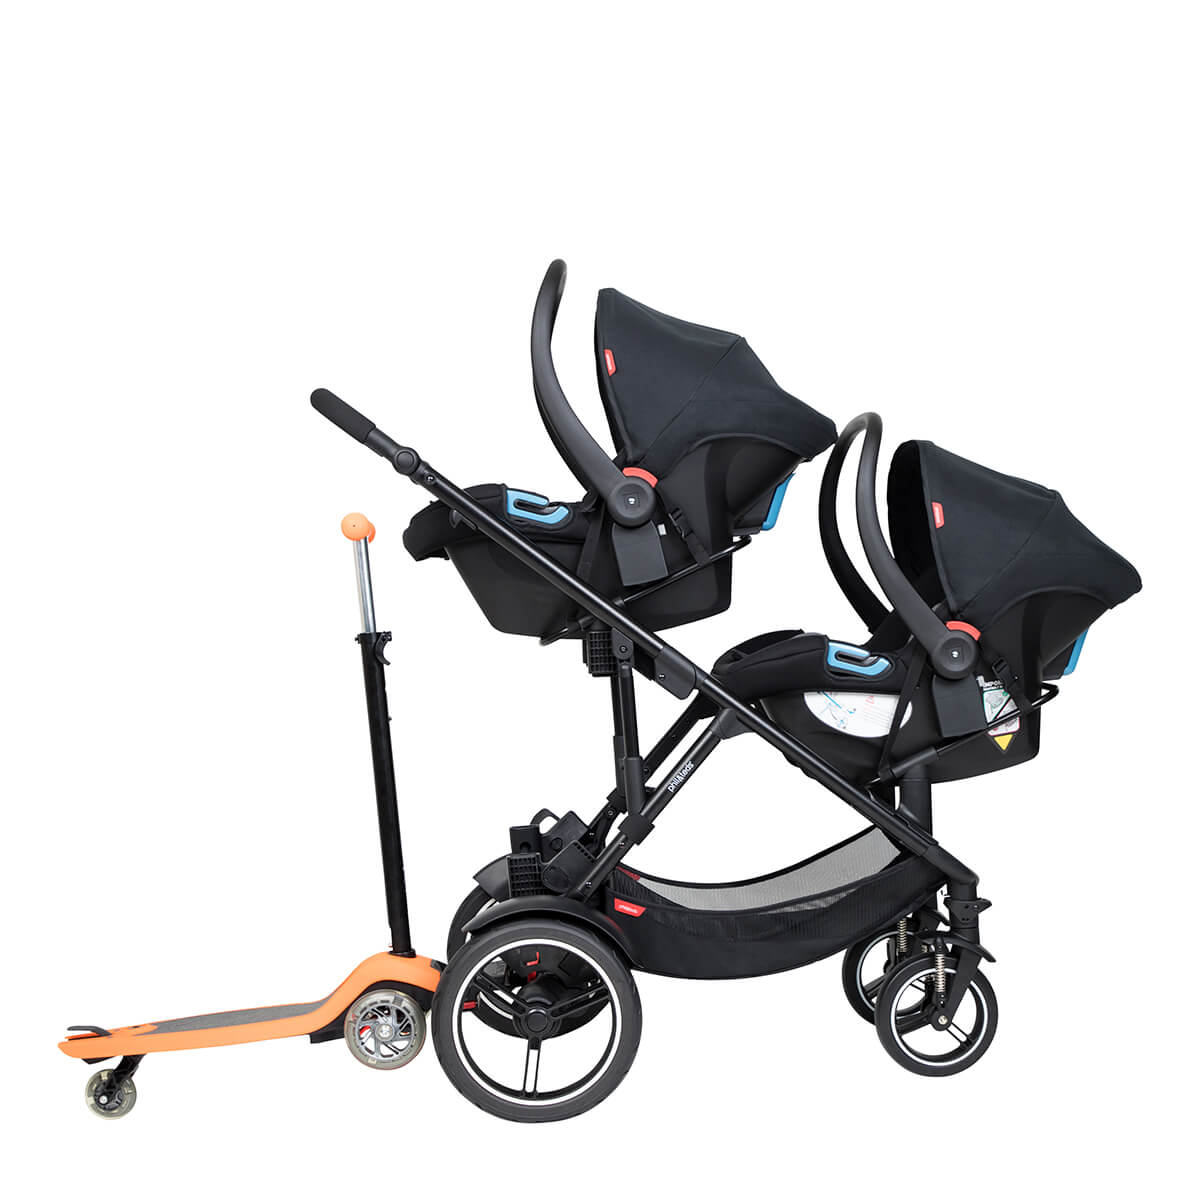 https://cdn.accentuate.io/7508563361970/19438665367730/philteds-voyager-buggy-with-double-travel-systems-and-freerider-stroller-board-in-the-rear-v1667177330761.jpg?1200x1200